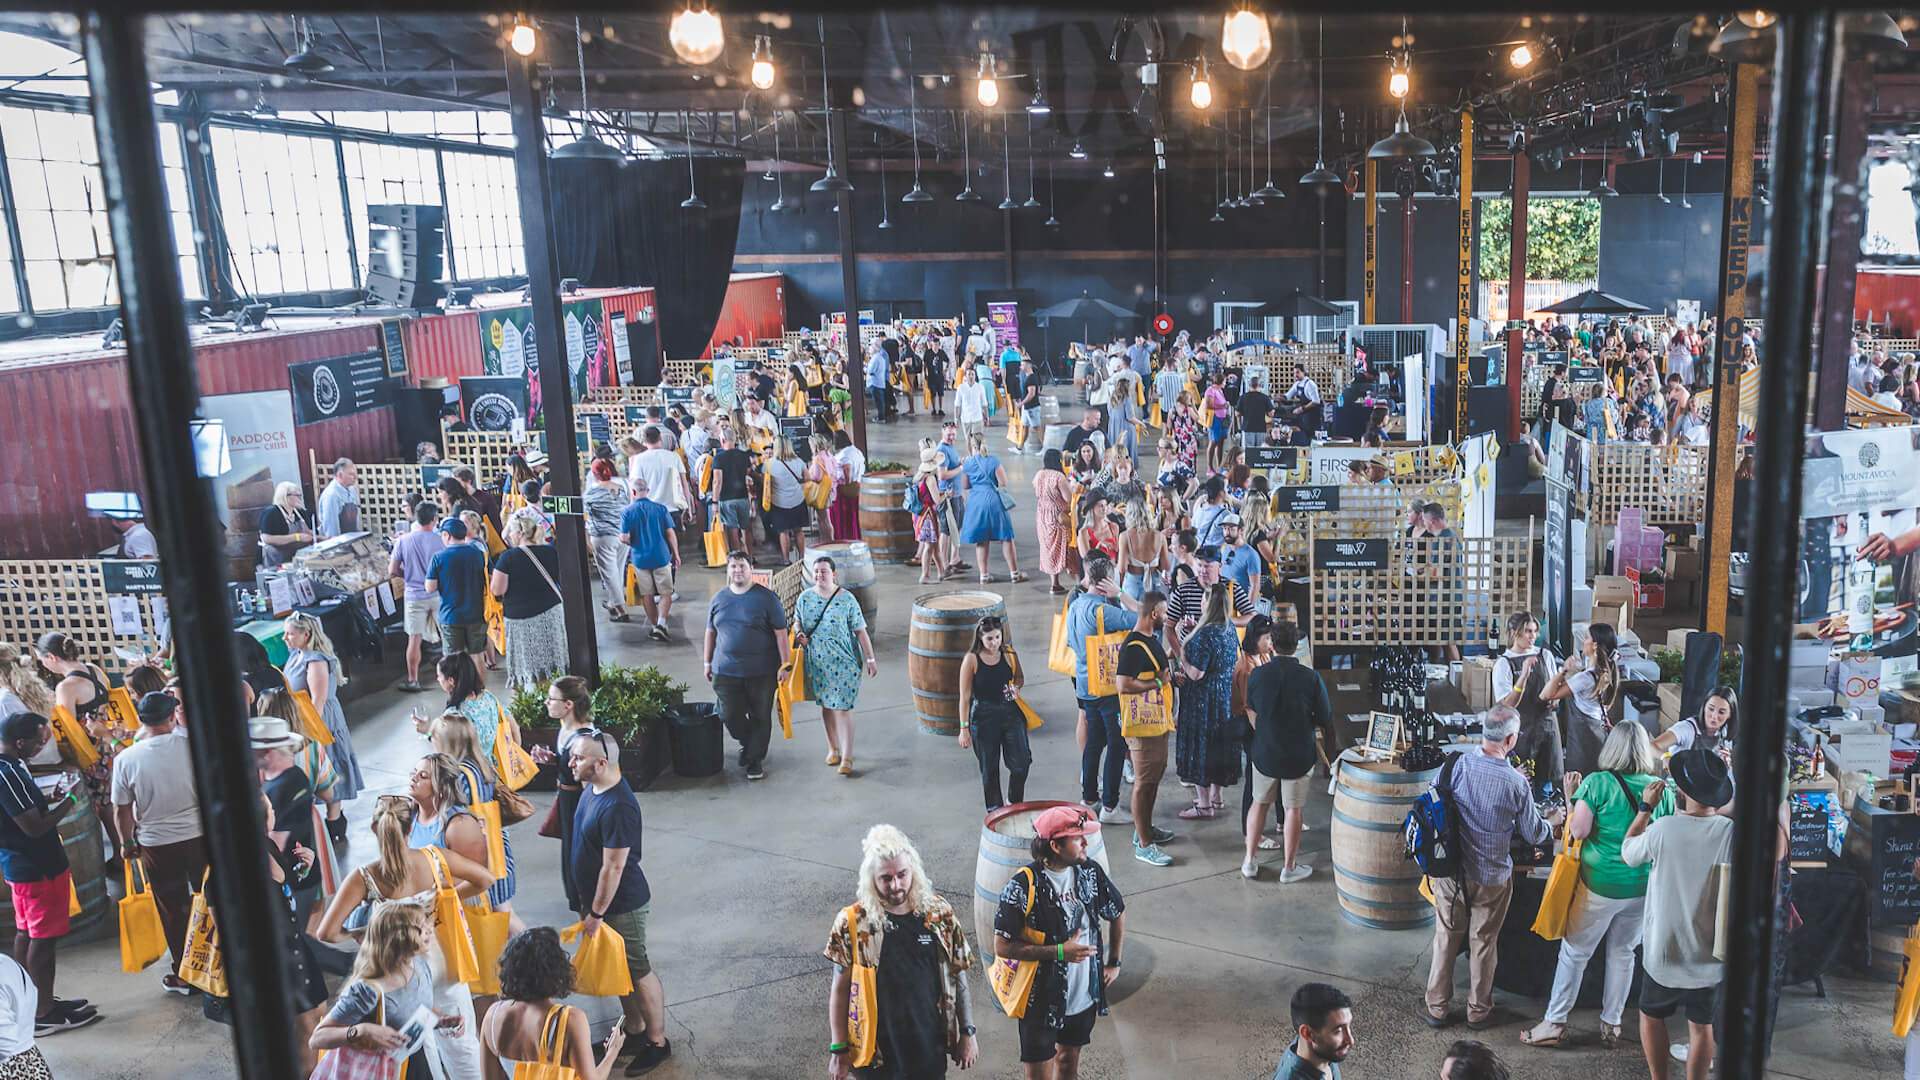 Wine and Cheese Fest - Melbourne at Timber Yards